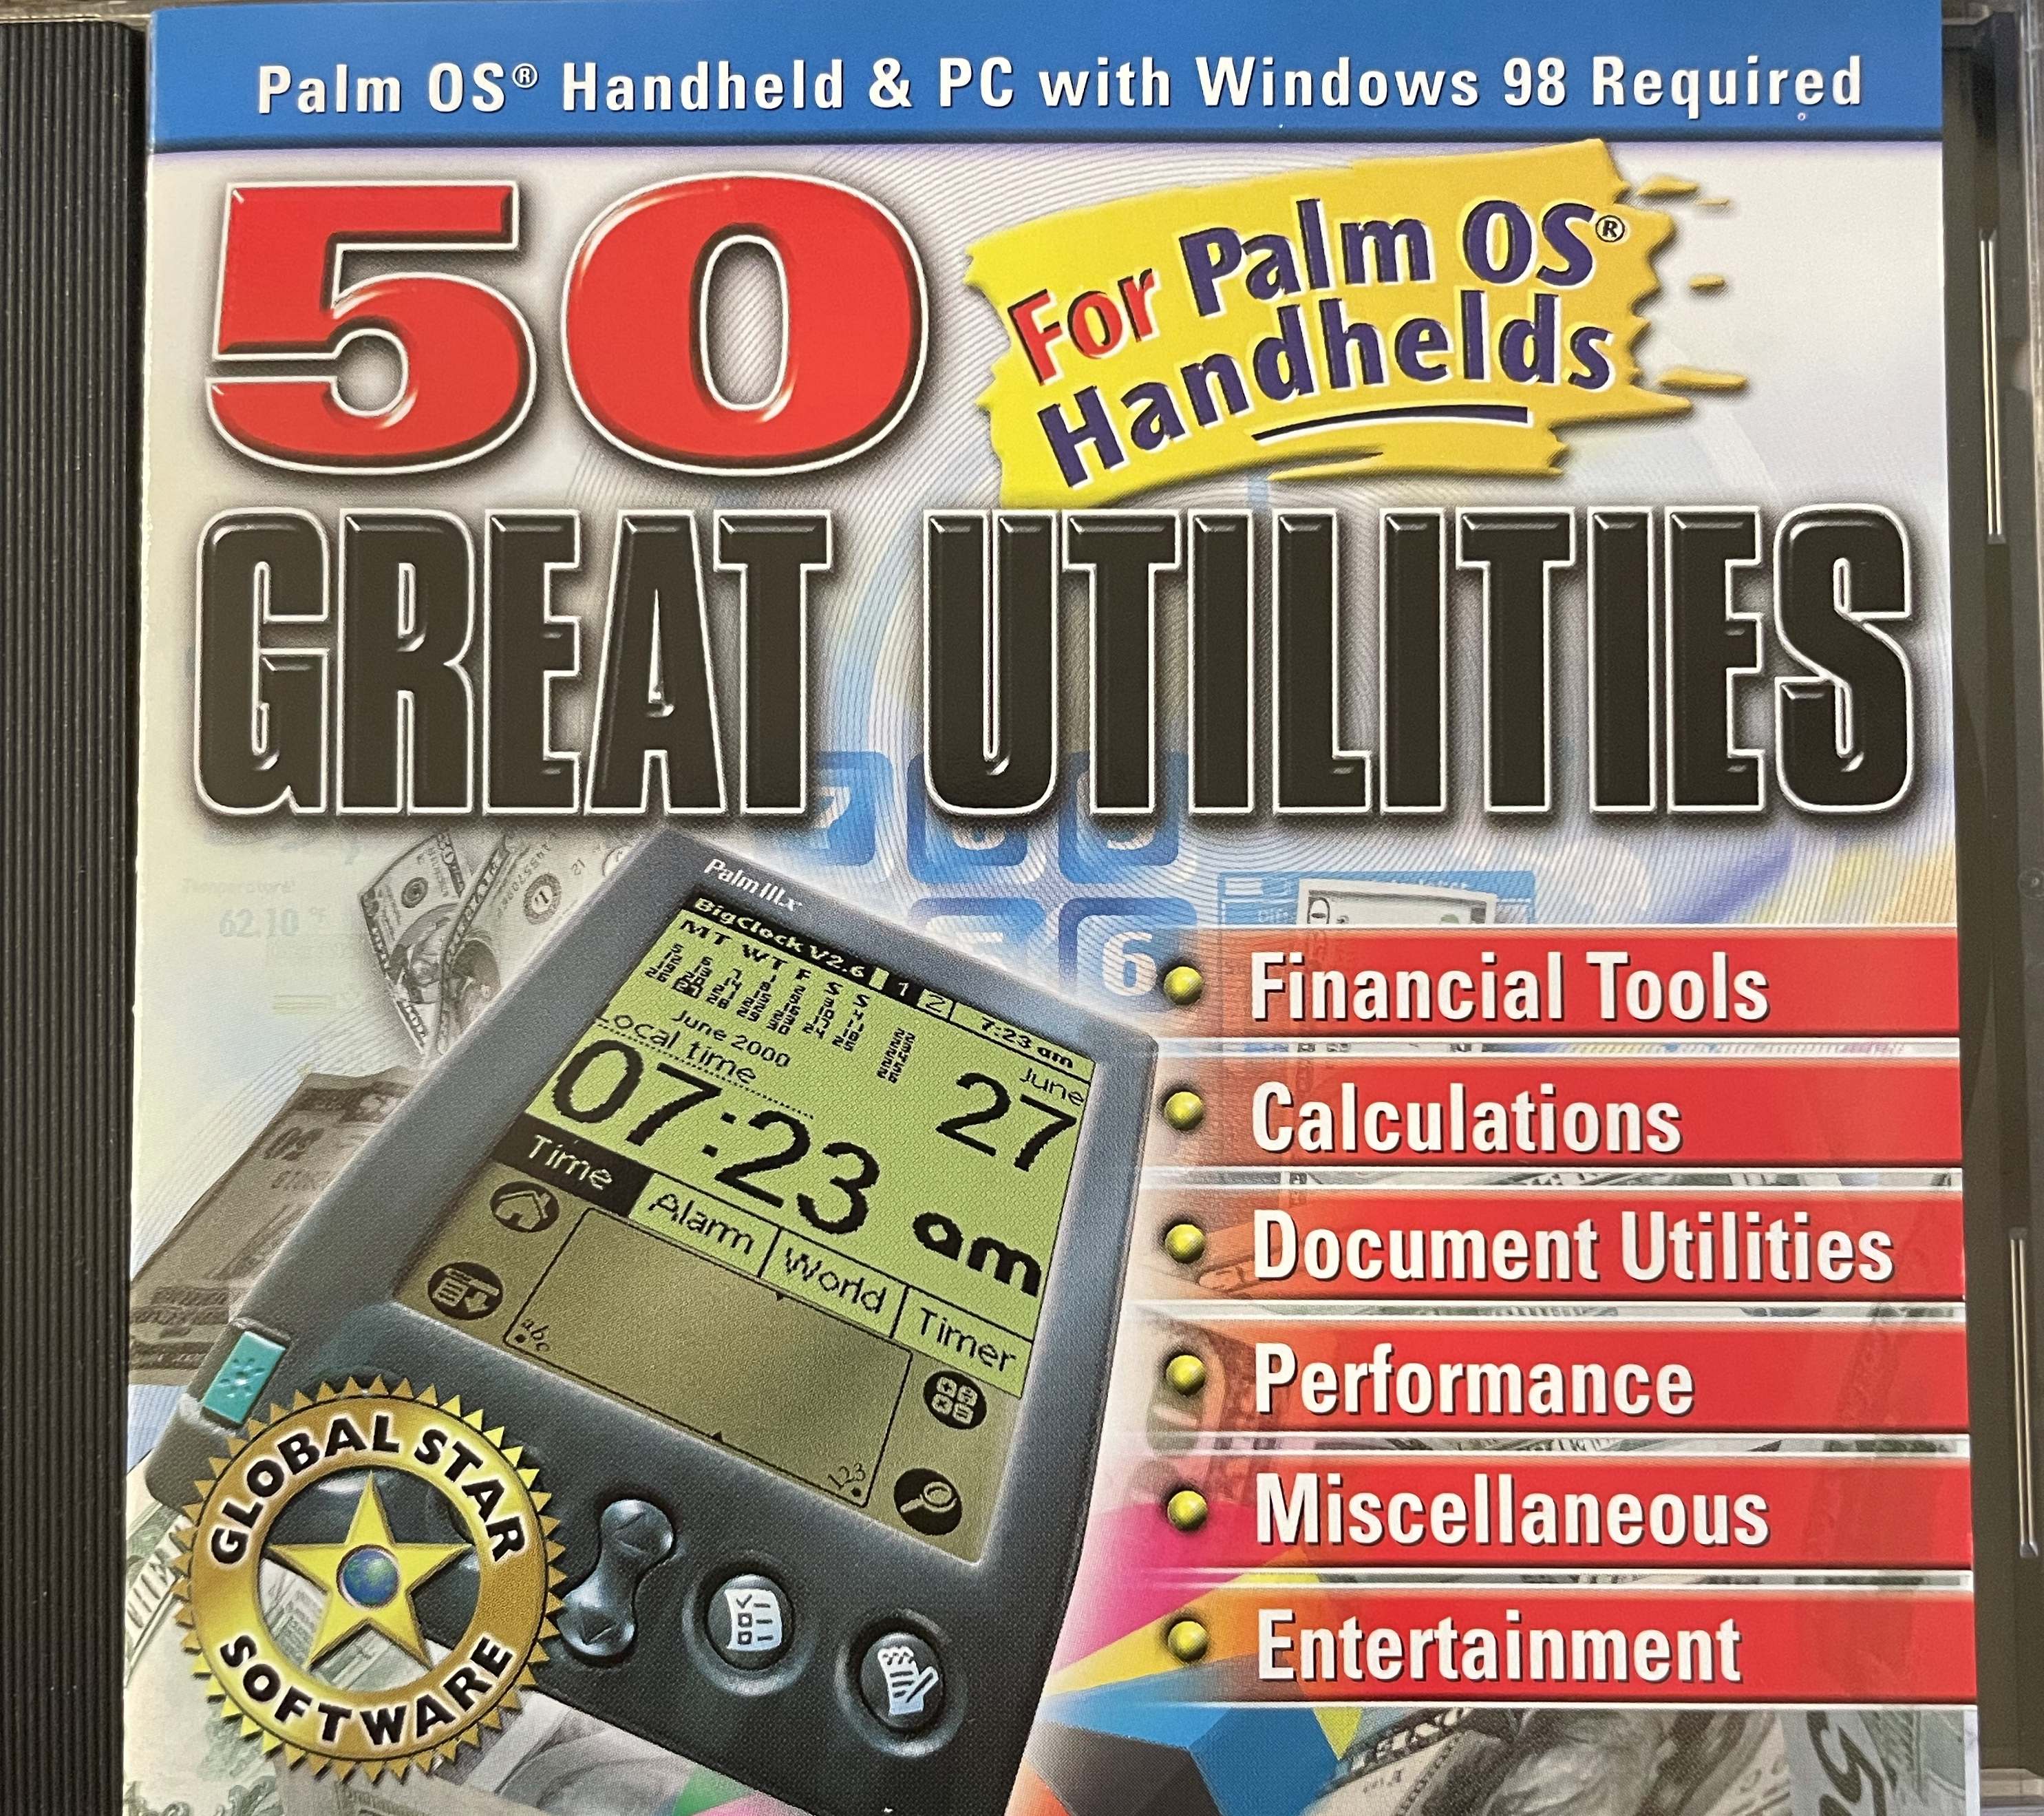 50 Great Utilities for Palm OS Handhelds (Vol. 1)